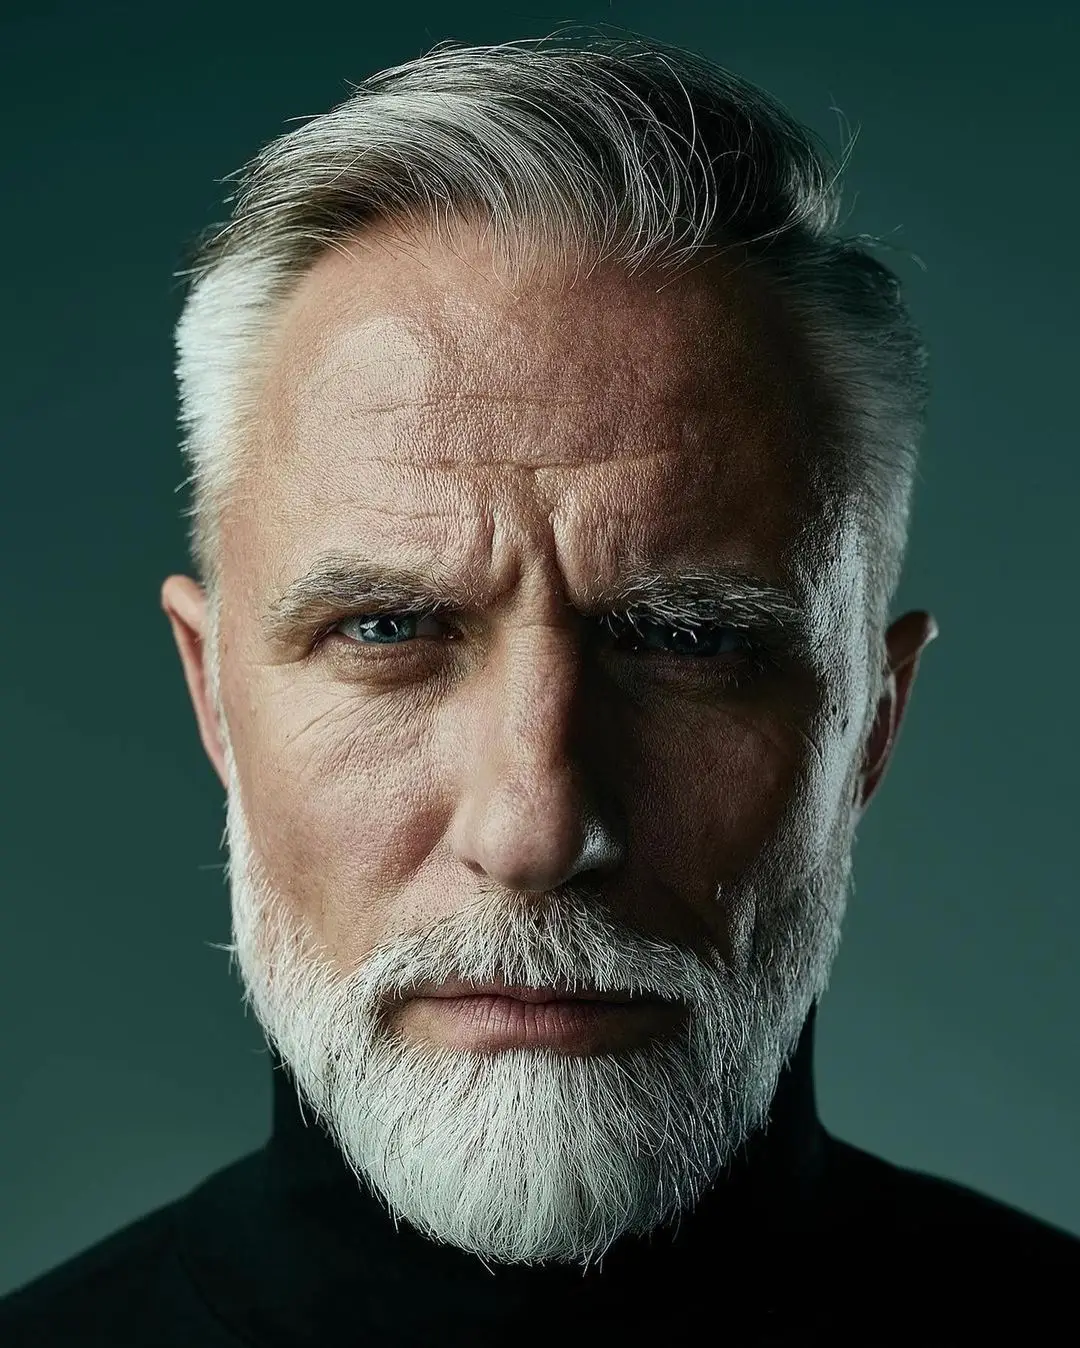 28 Silver Foxes That Will Definitely Persuade You to Date an Older Man ...